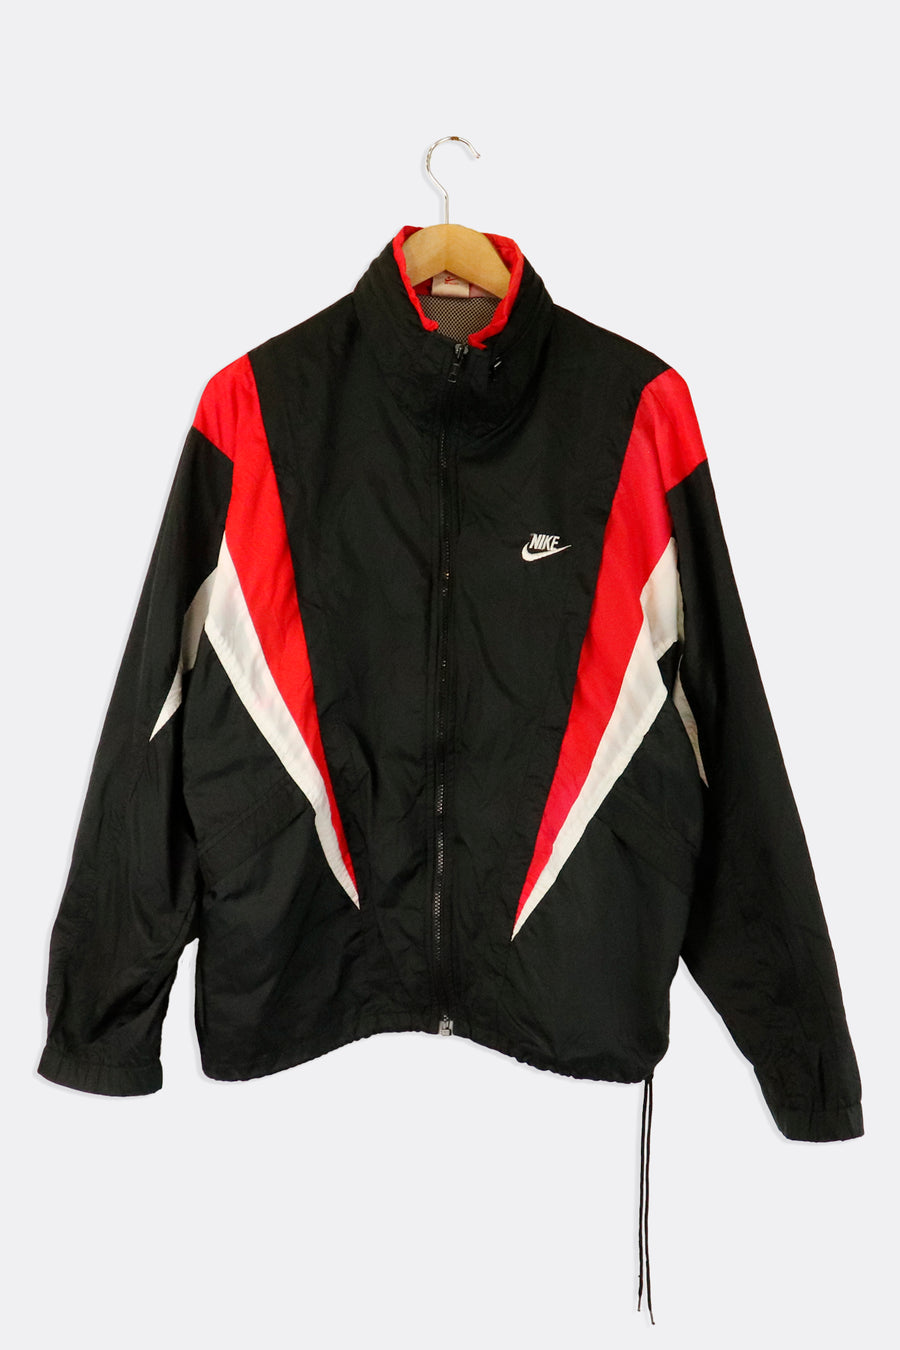 Vintage Nike Full Zip Red And White Under Armpits And Onto Front Full Zip Wind Breaker Jacket